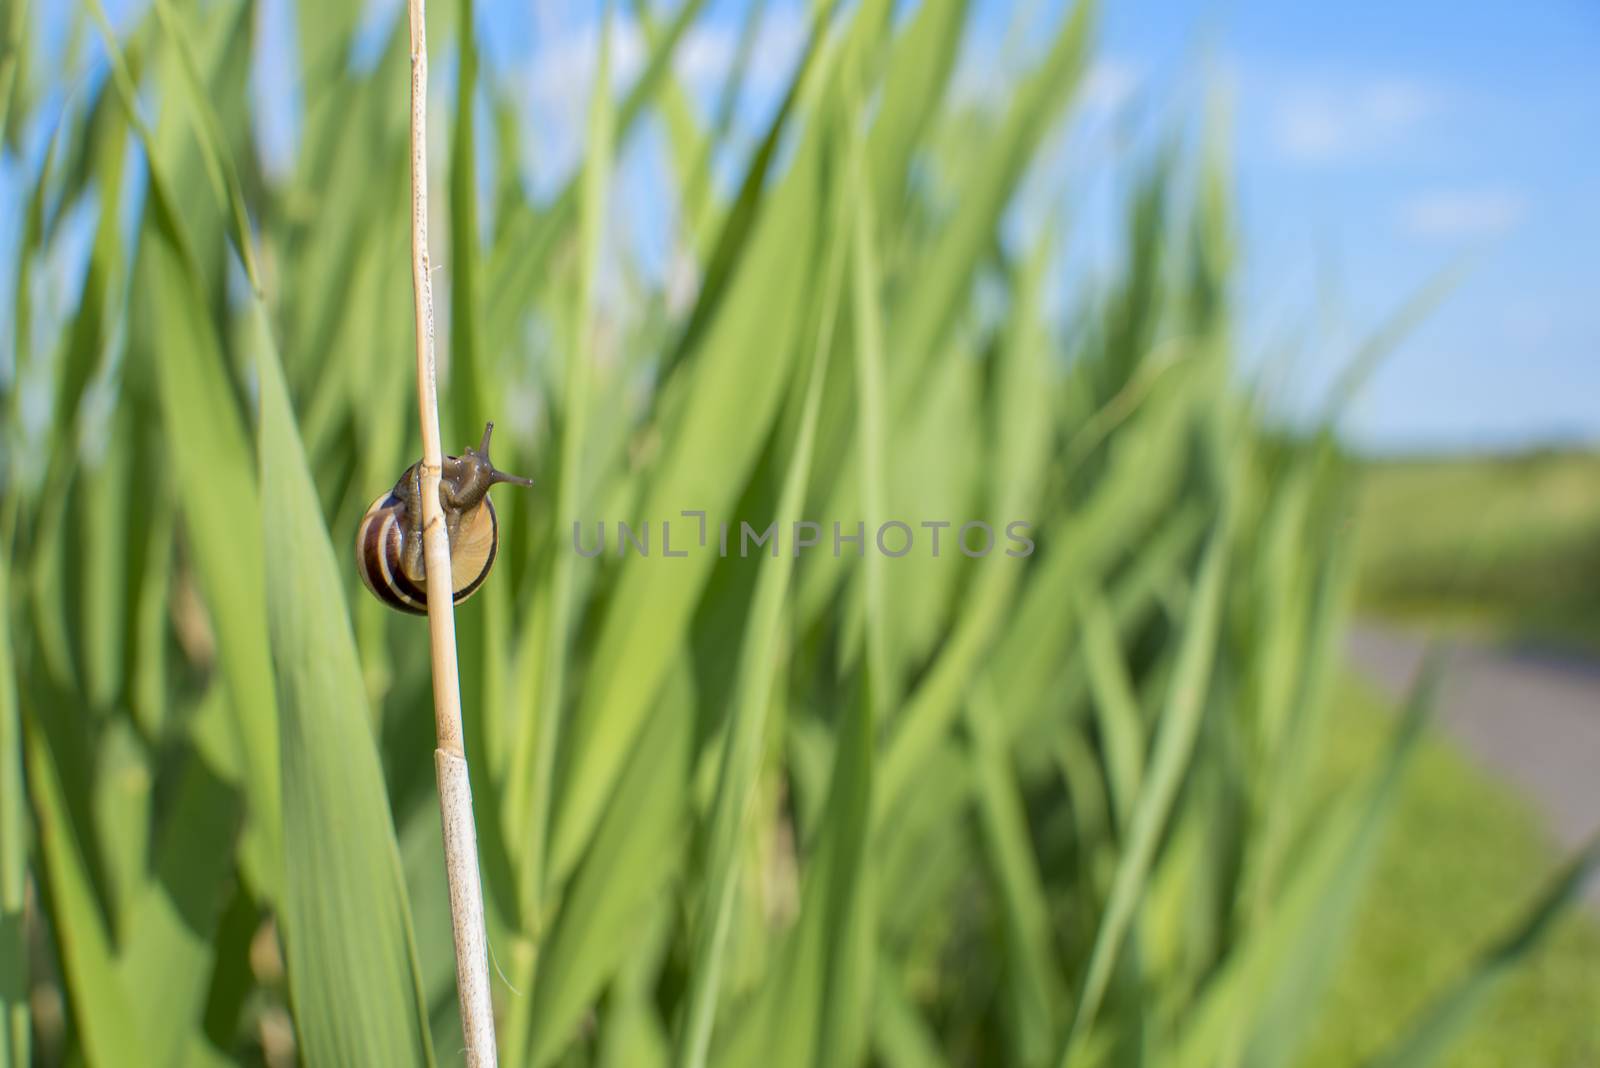 Snail in the grass by rgbspace